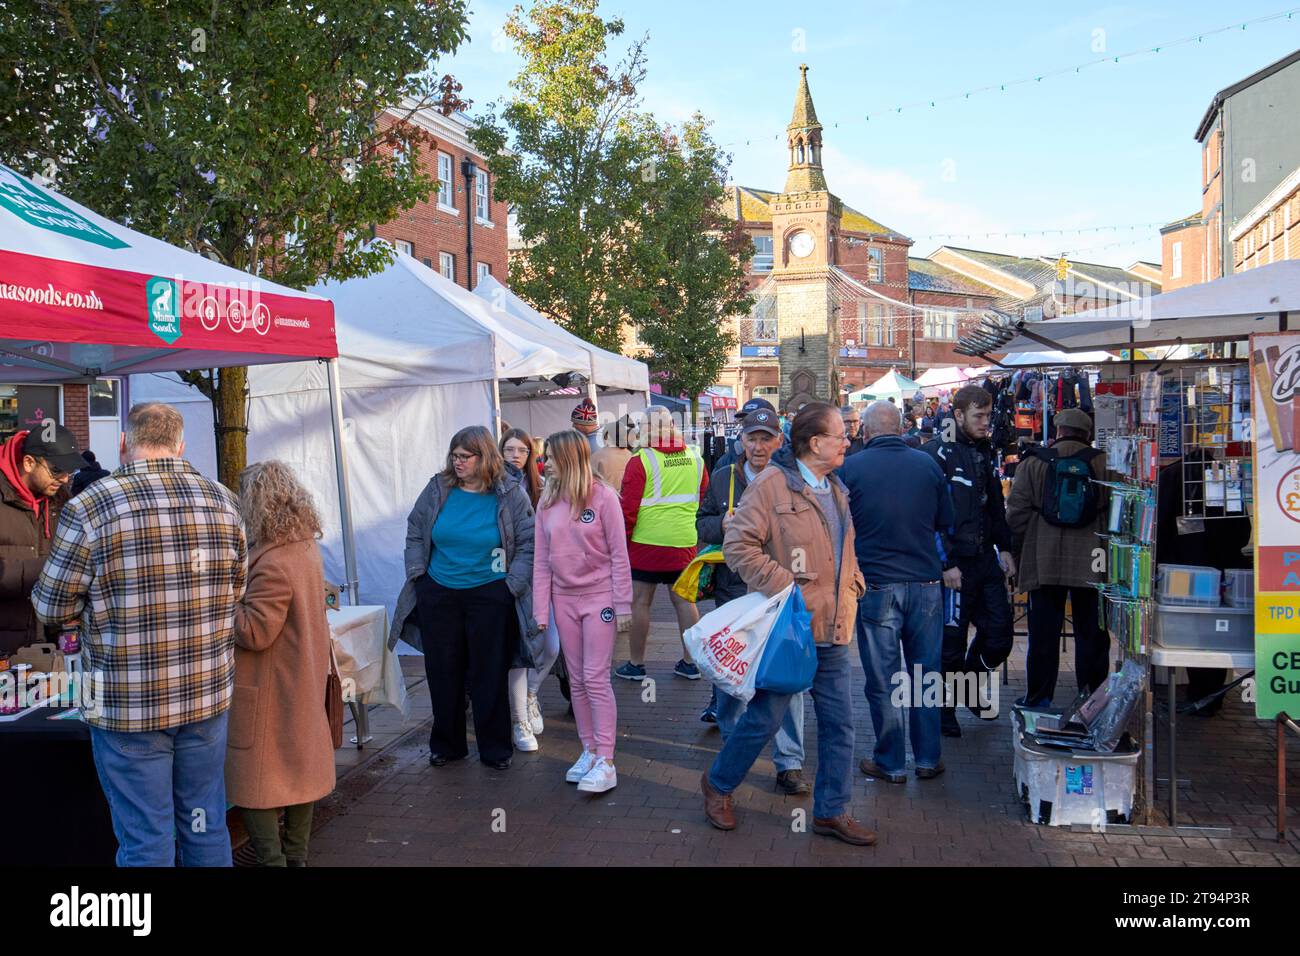 market stalls in winter on a saturday market day in the market town of ormskirk, lancashire, england, uk Stock Photo